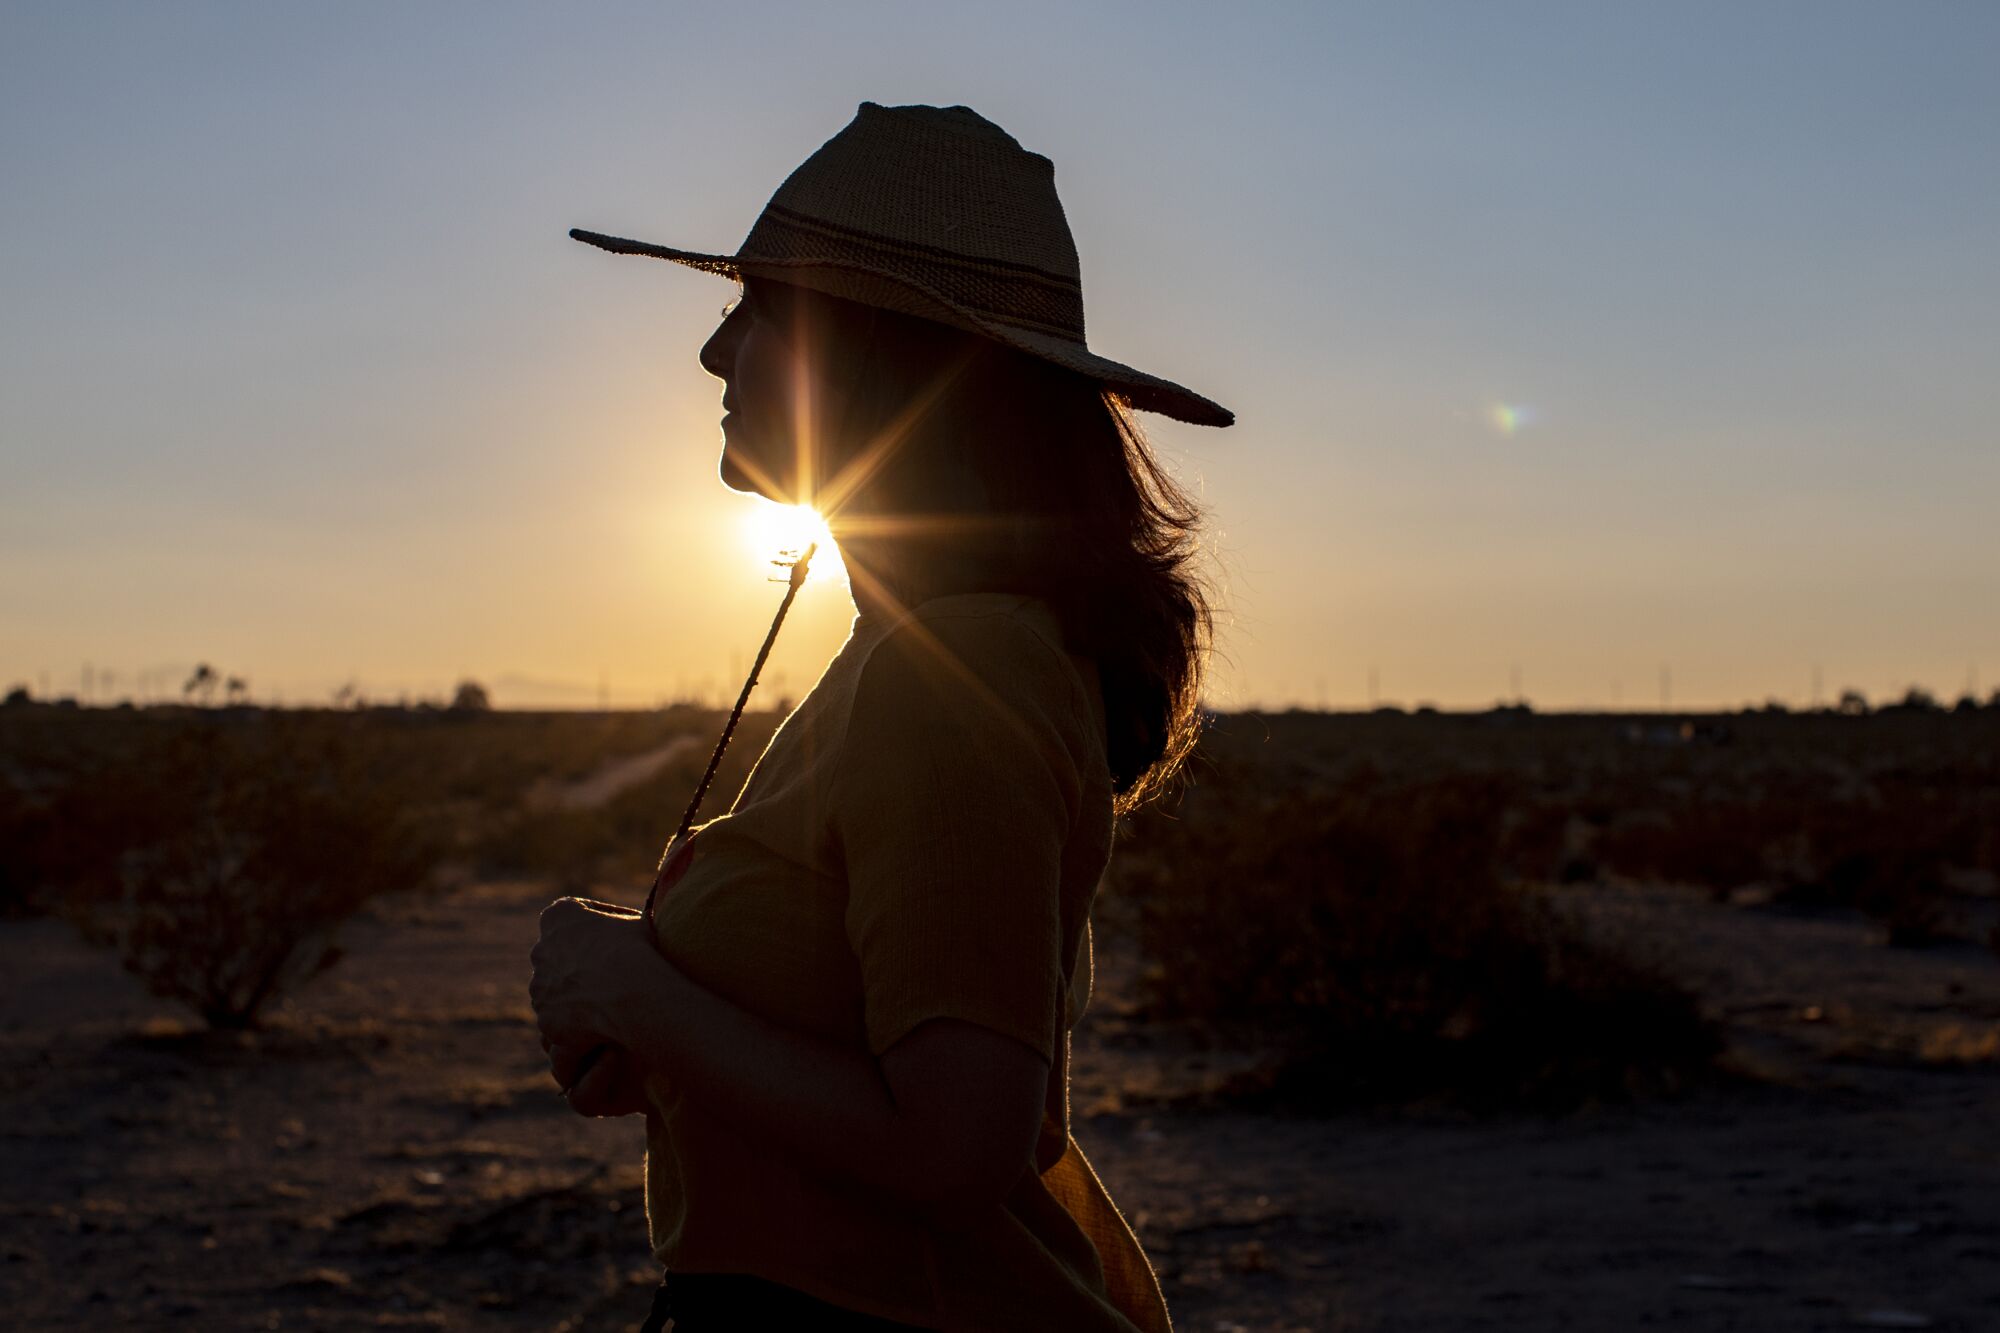 Author Claire Vaye Watkins is silhouetted against a desert landscape at sunset.